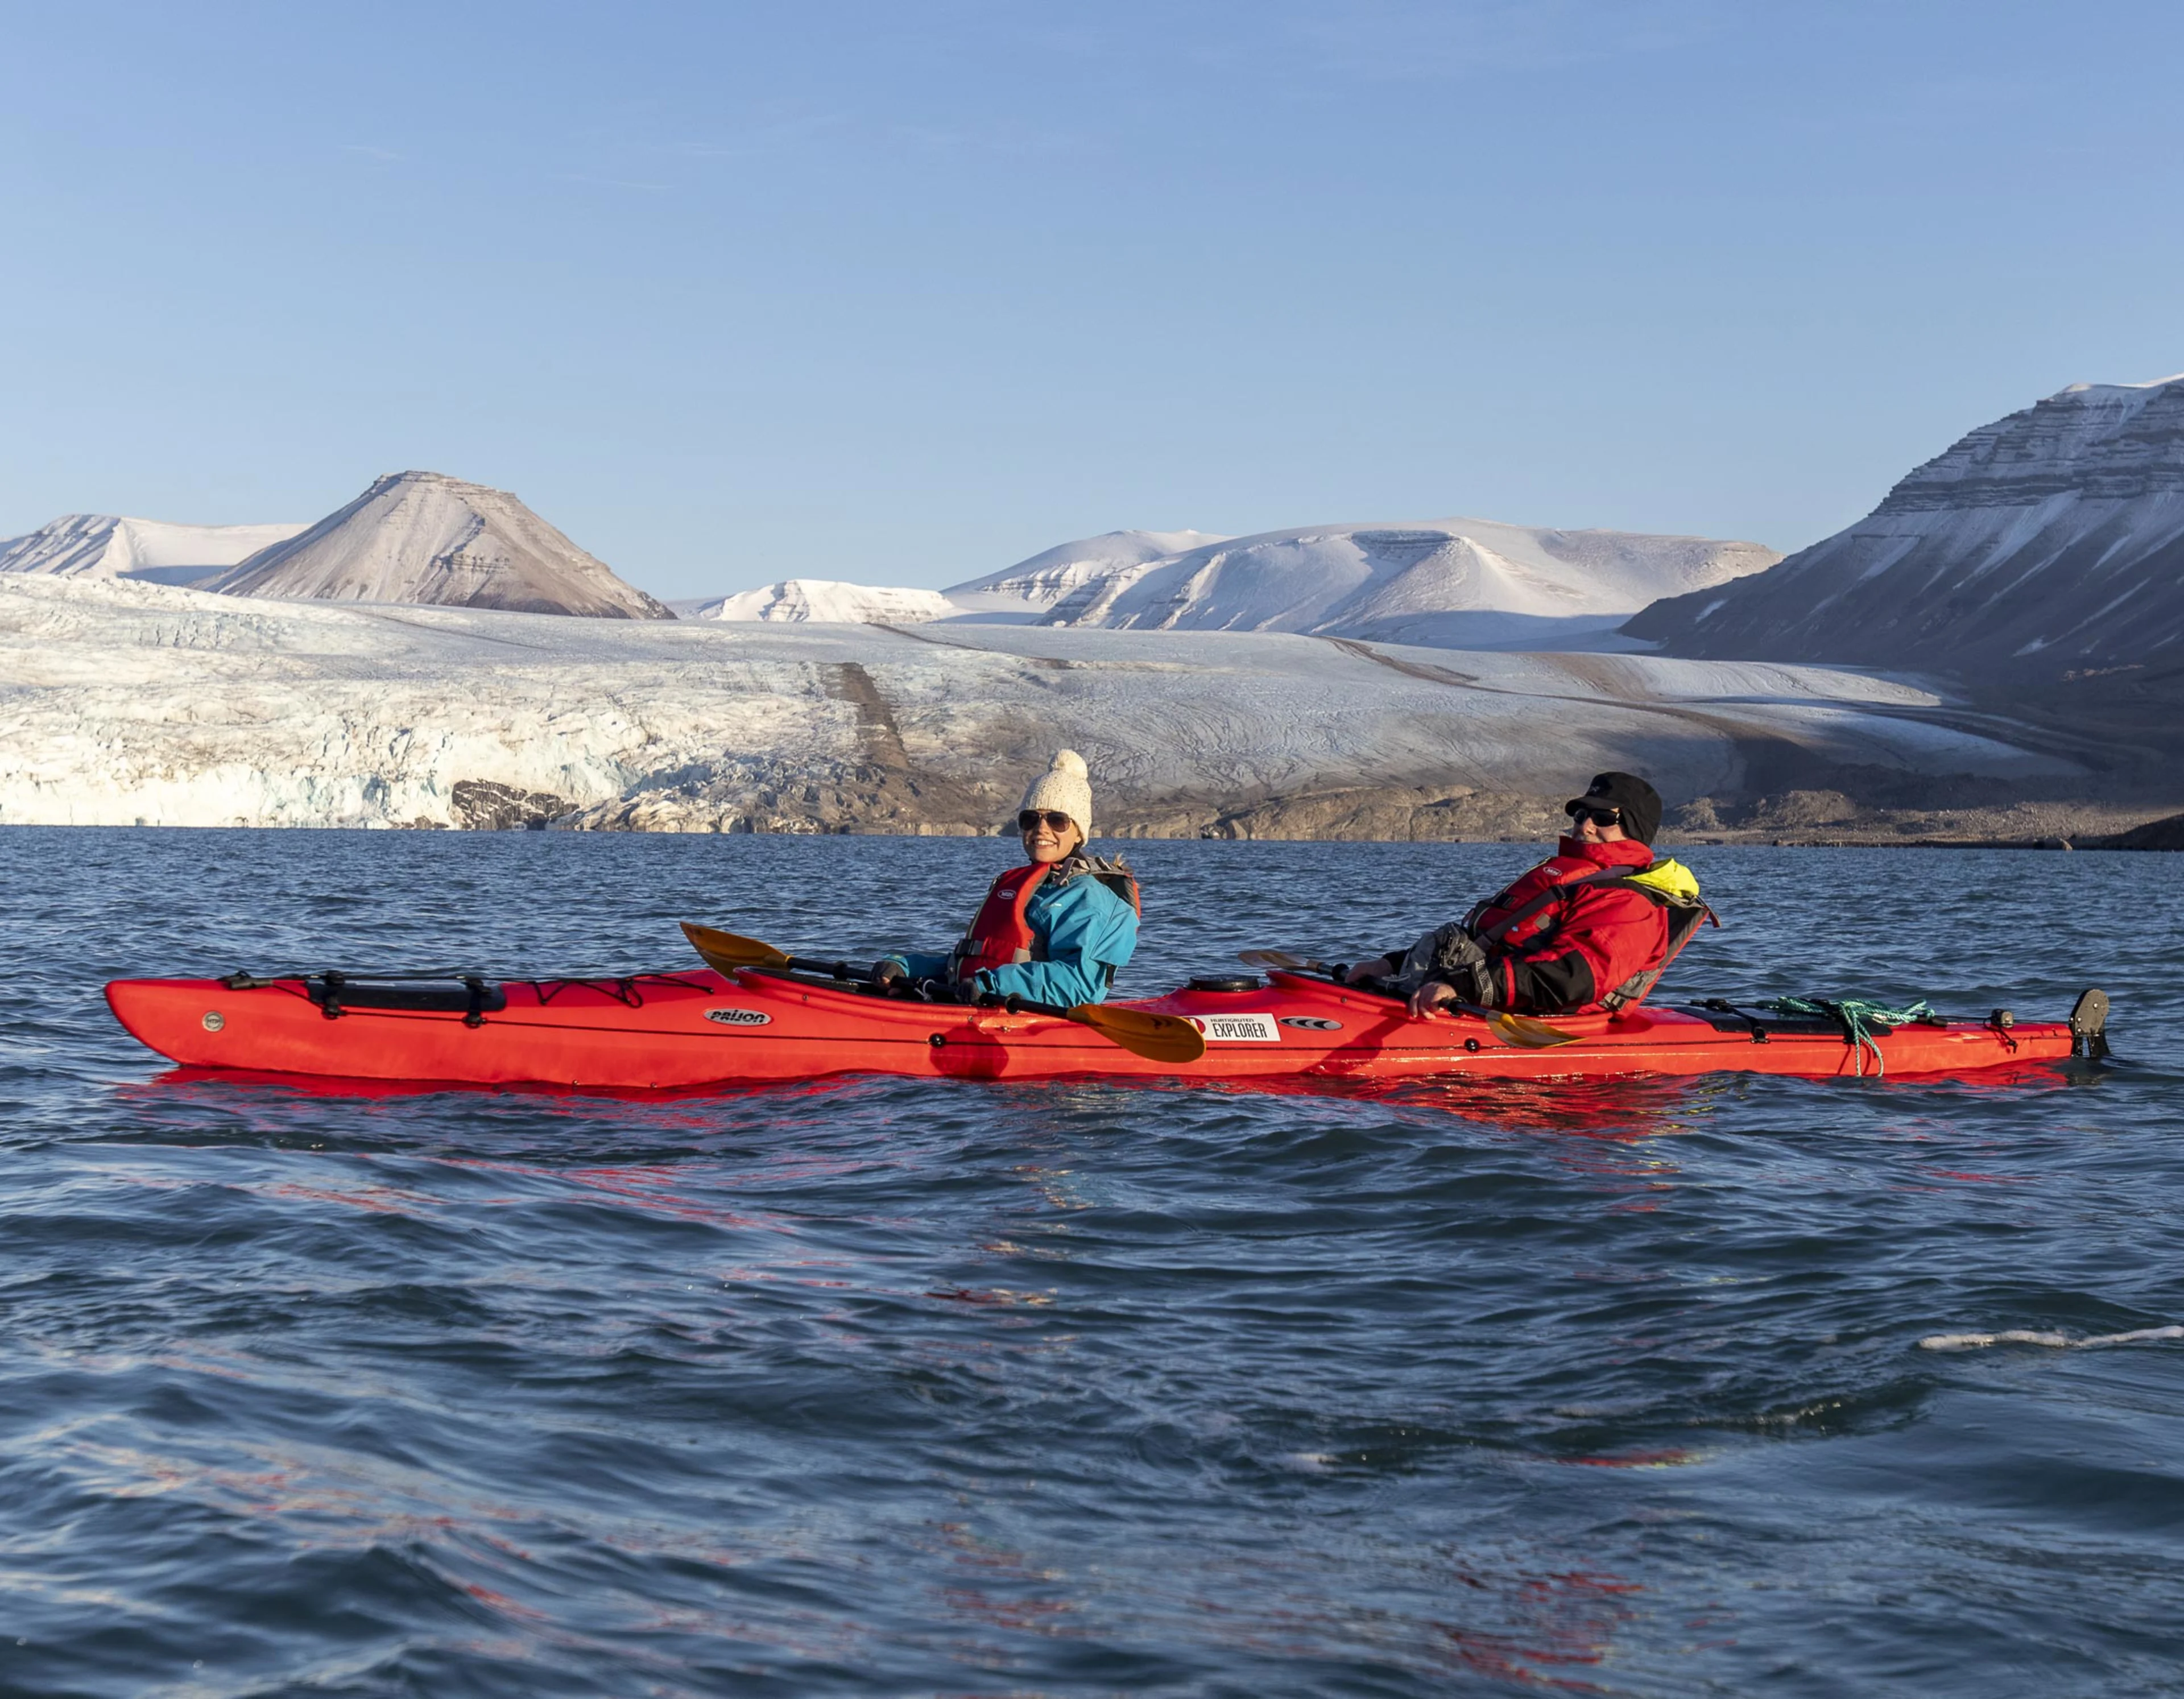 Expedition guests kayaking in Svalbard